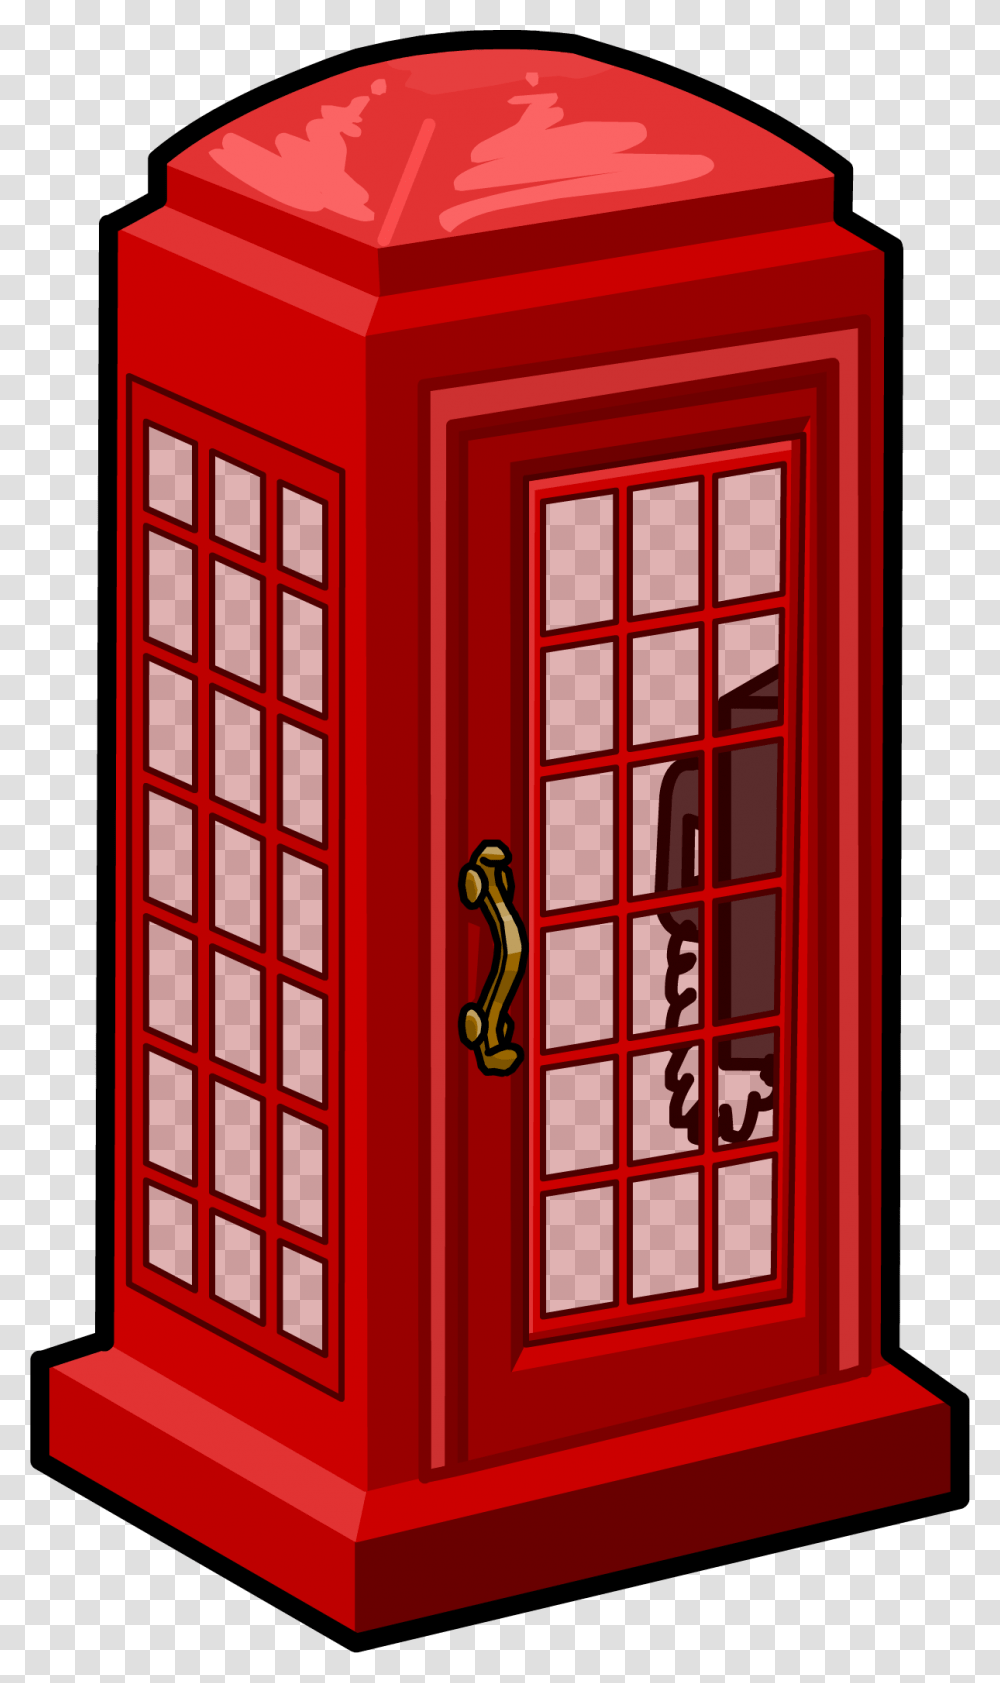 Telephone Booth Clipart, Mailbox, Letterbox, Kiosk Transparent Png